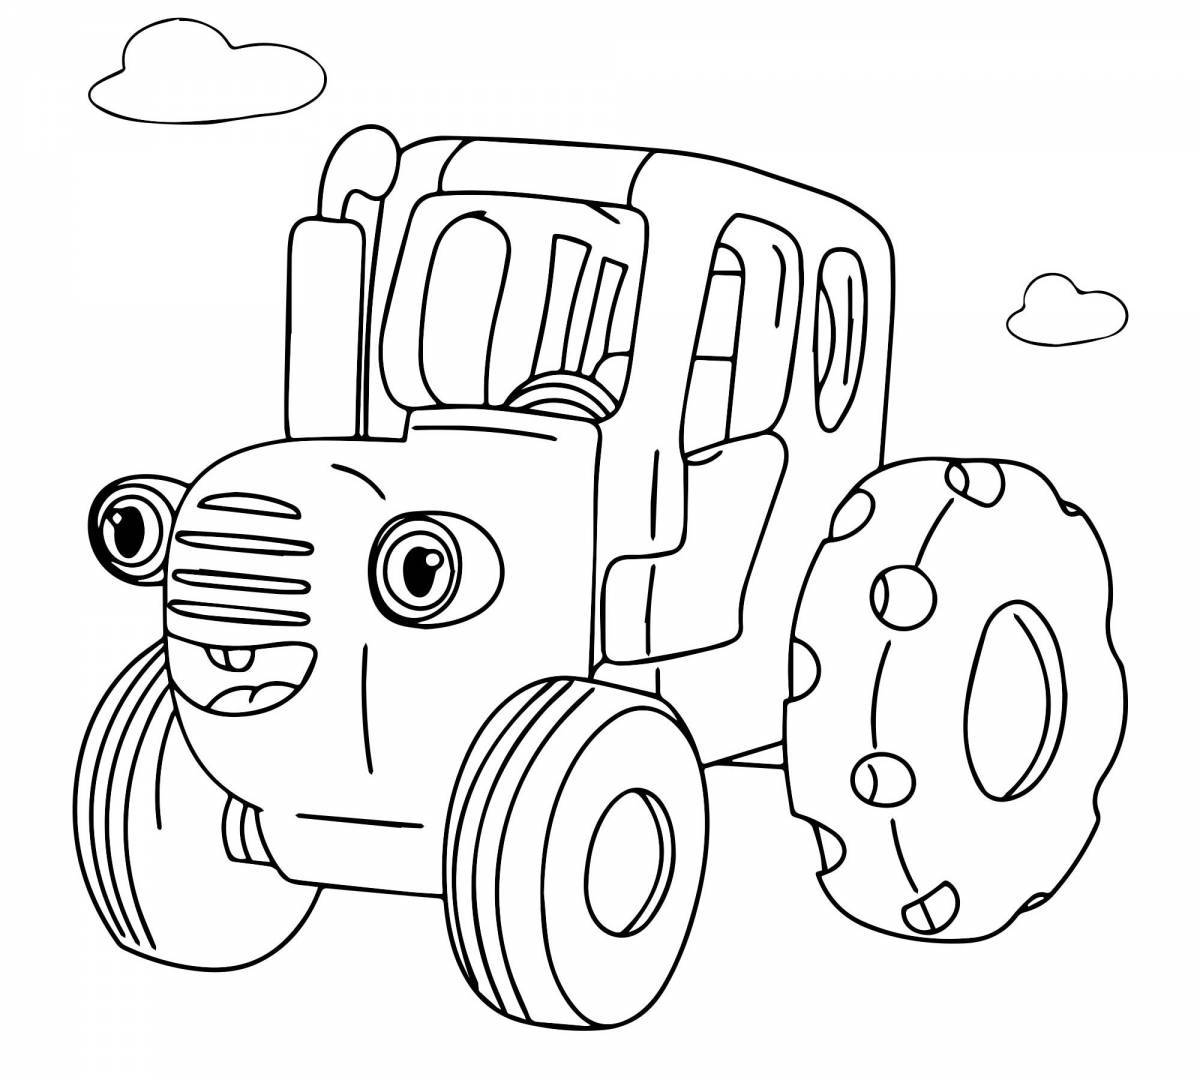 Flawless blue tractor coloring book for 2-3 year olds